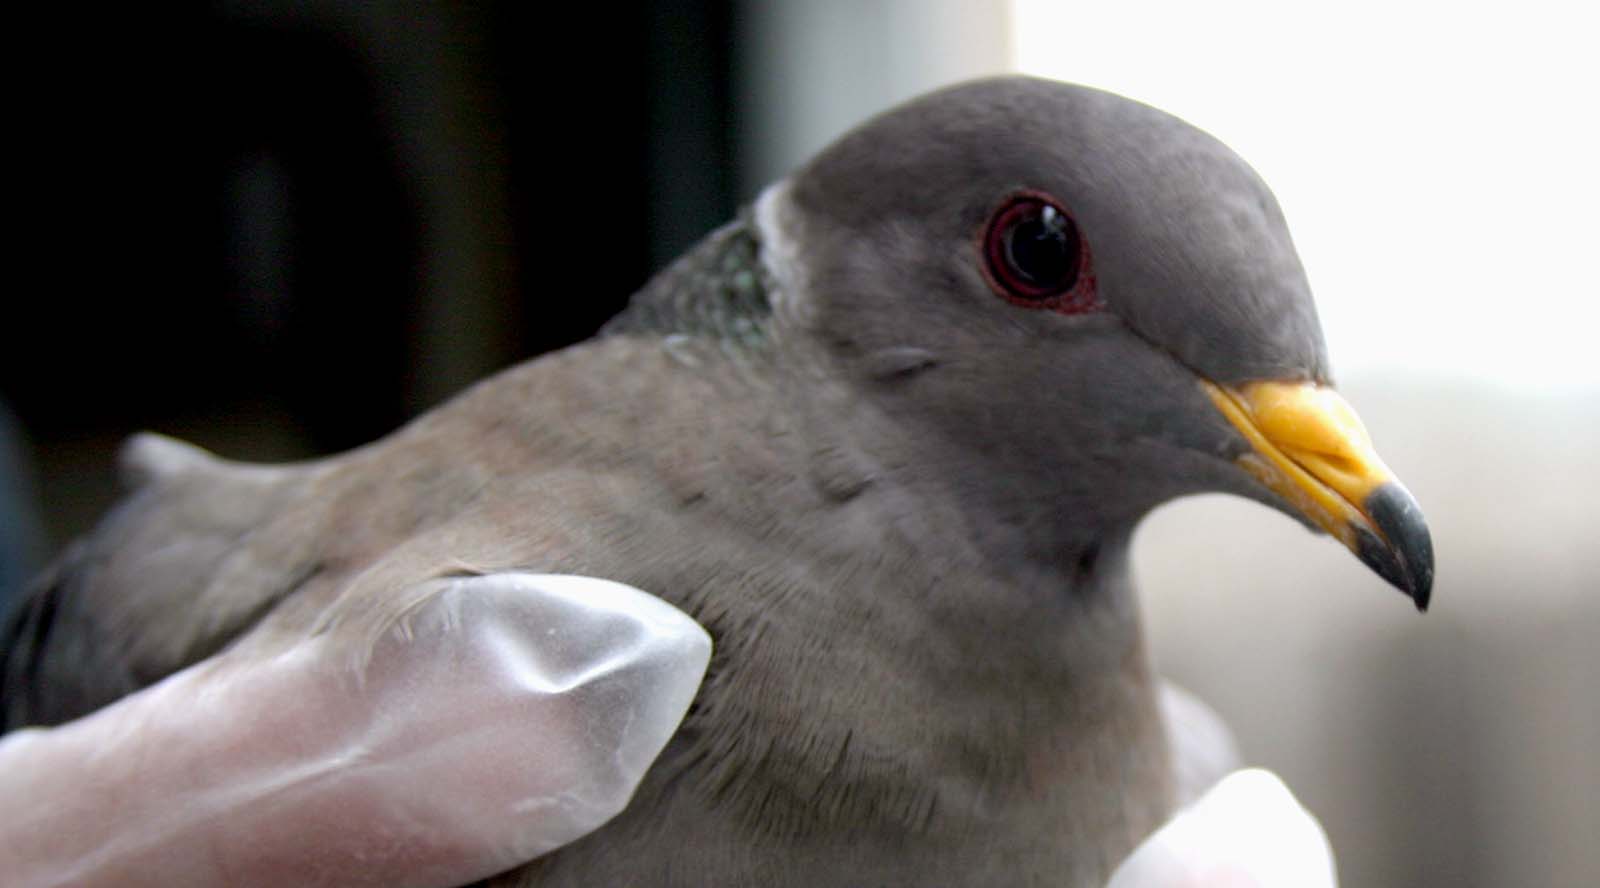 An injured dove being helped.